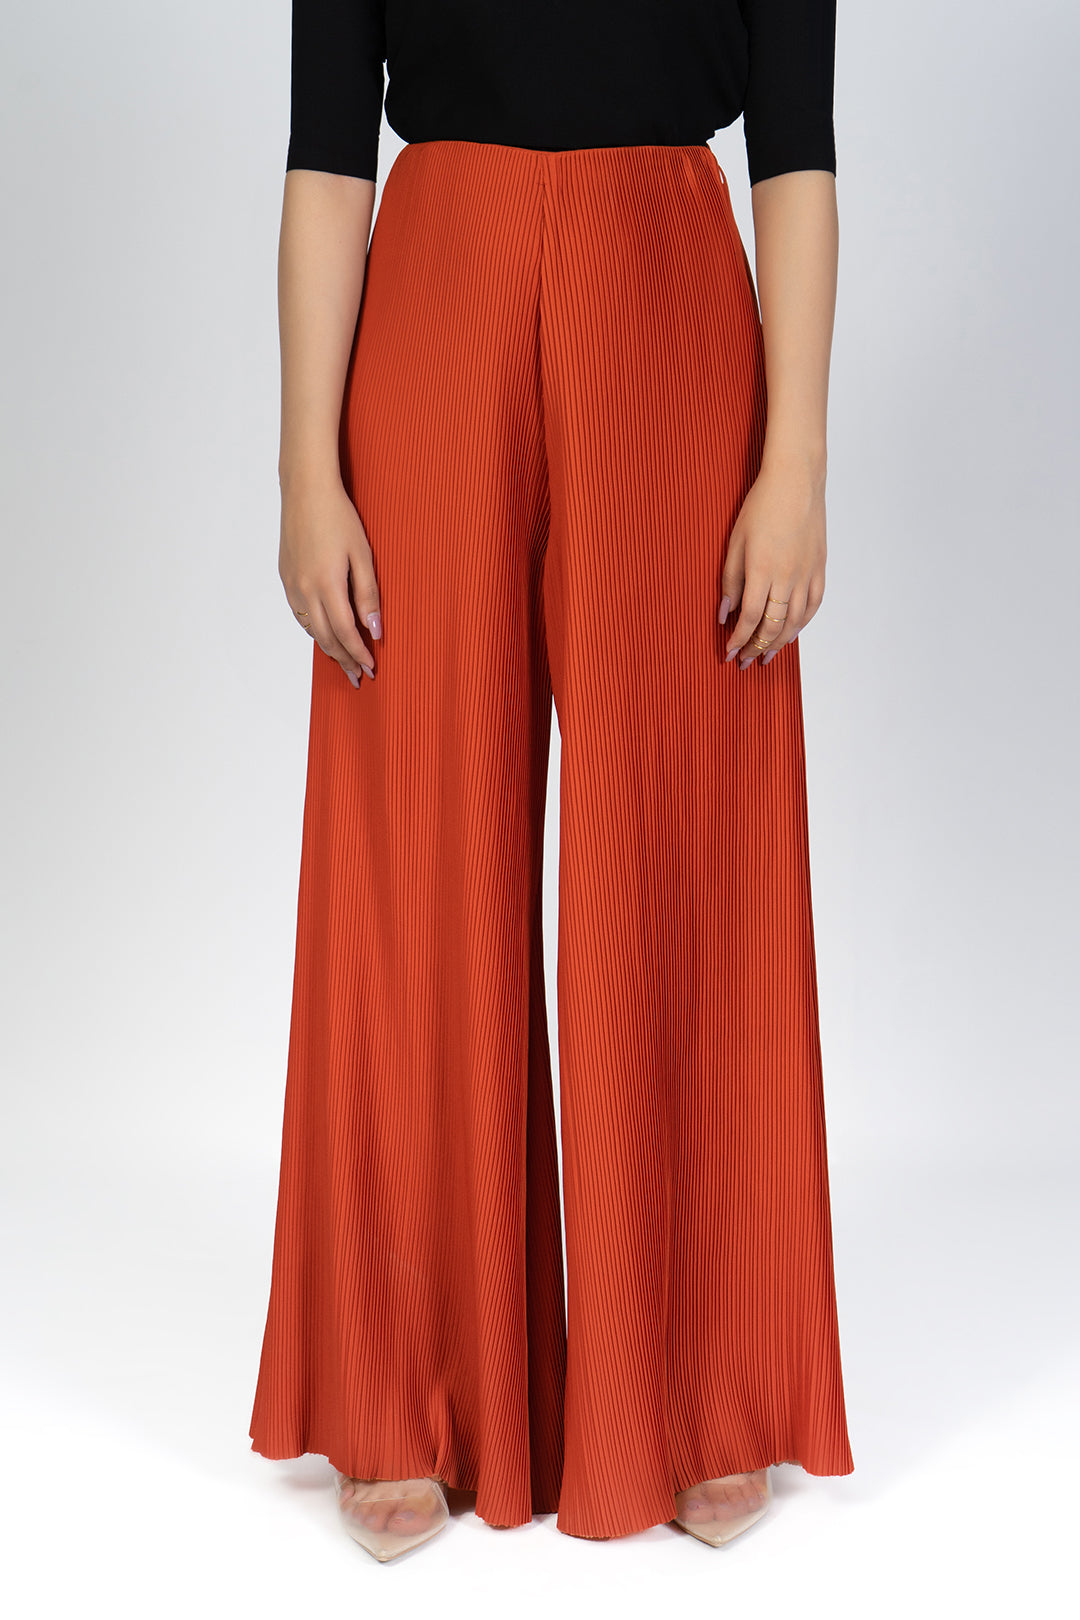 Muril Pleated Pants